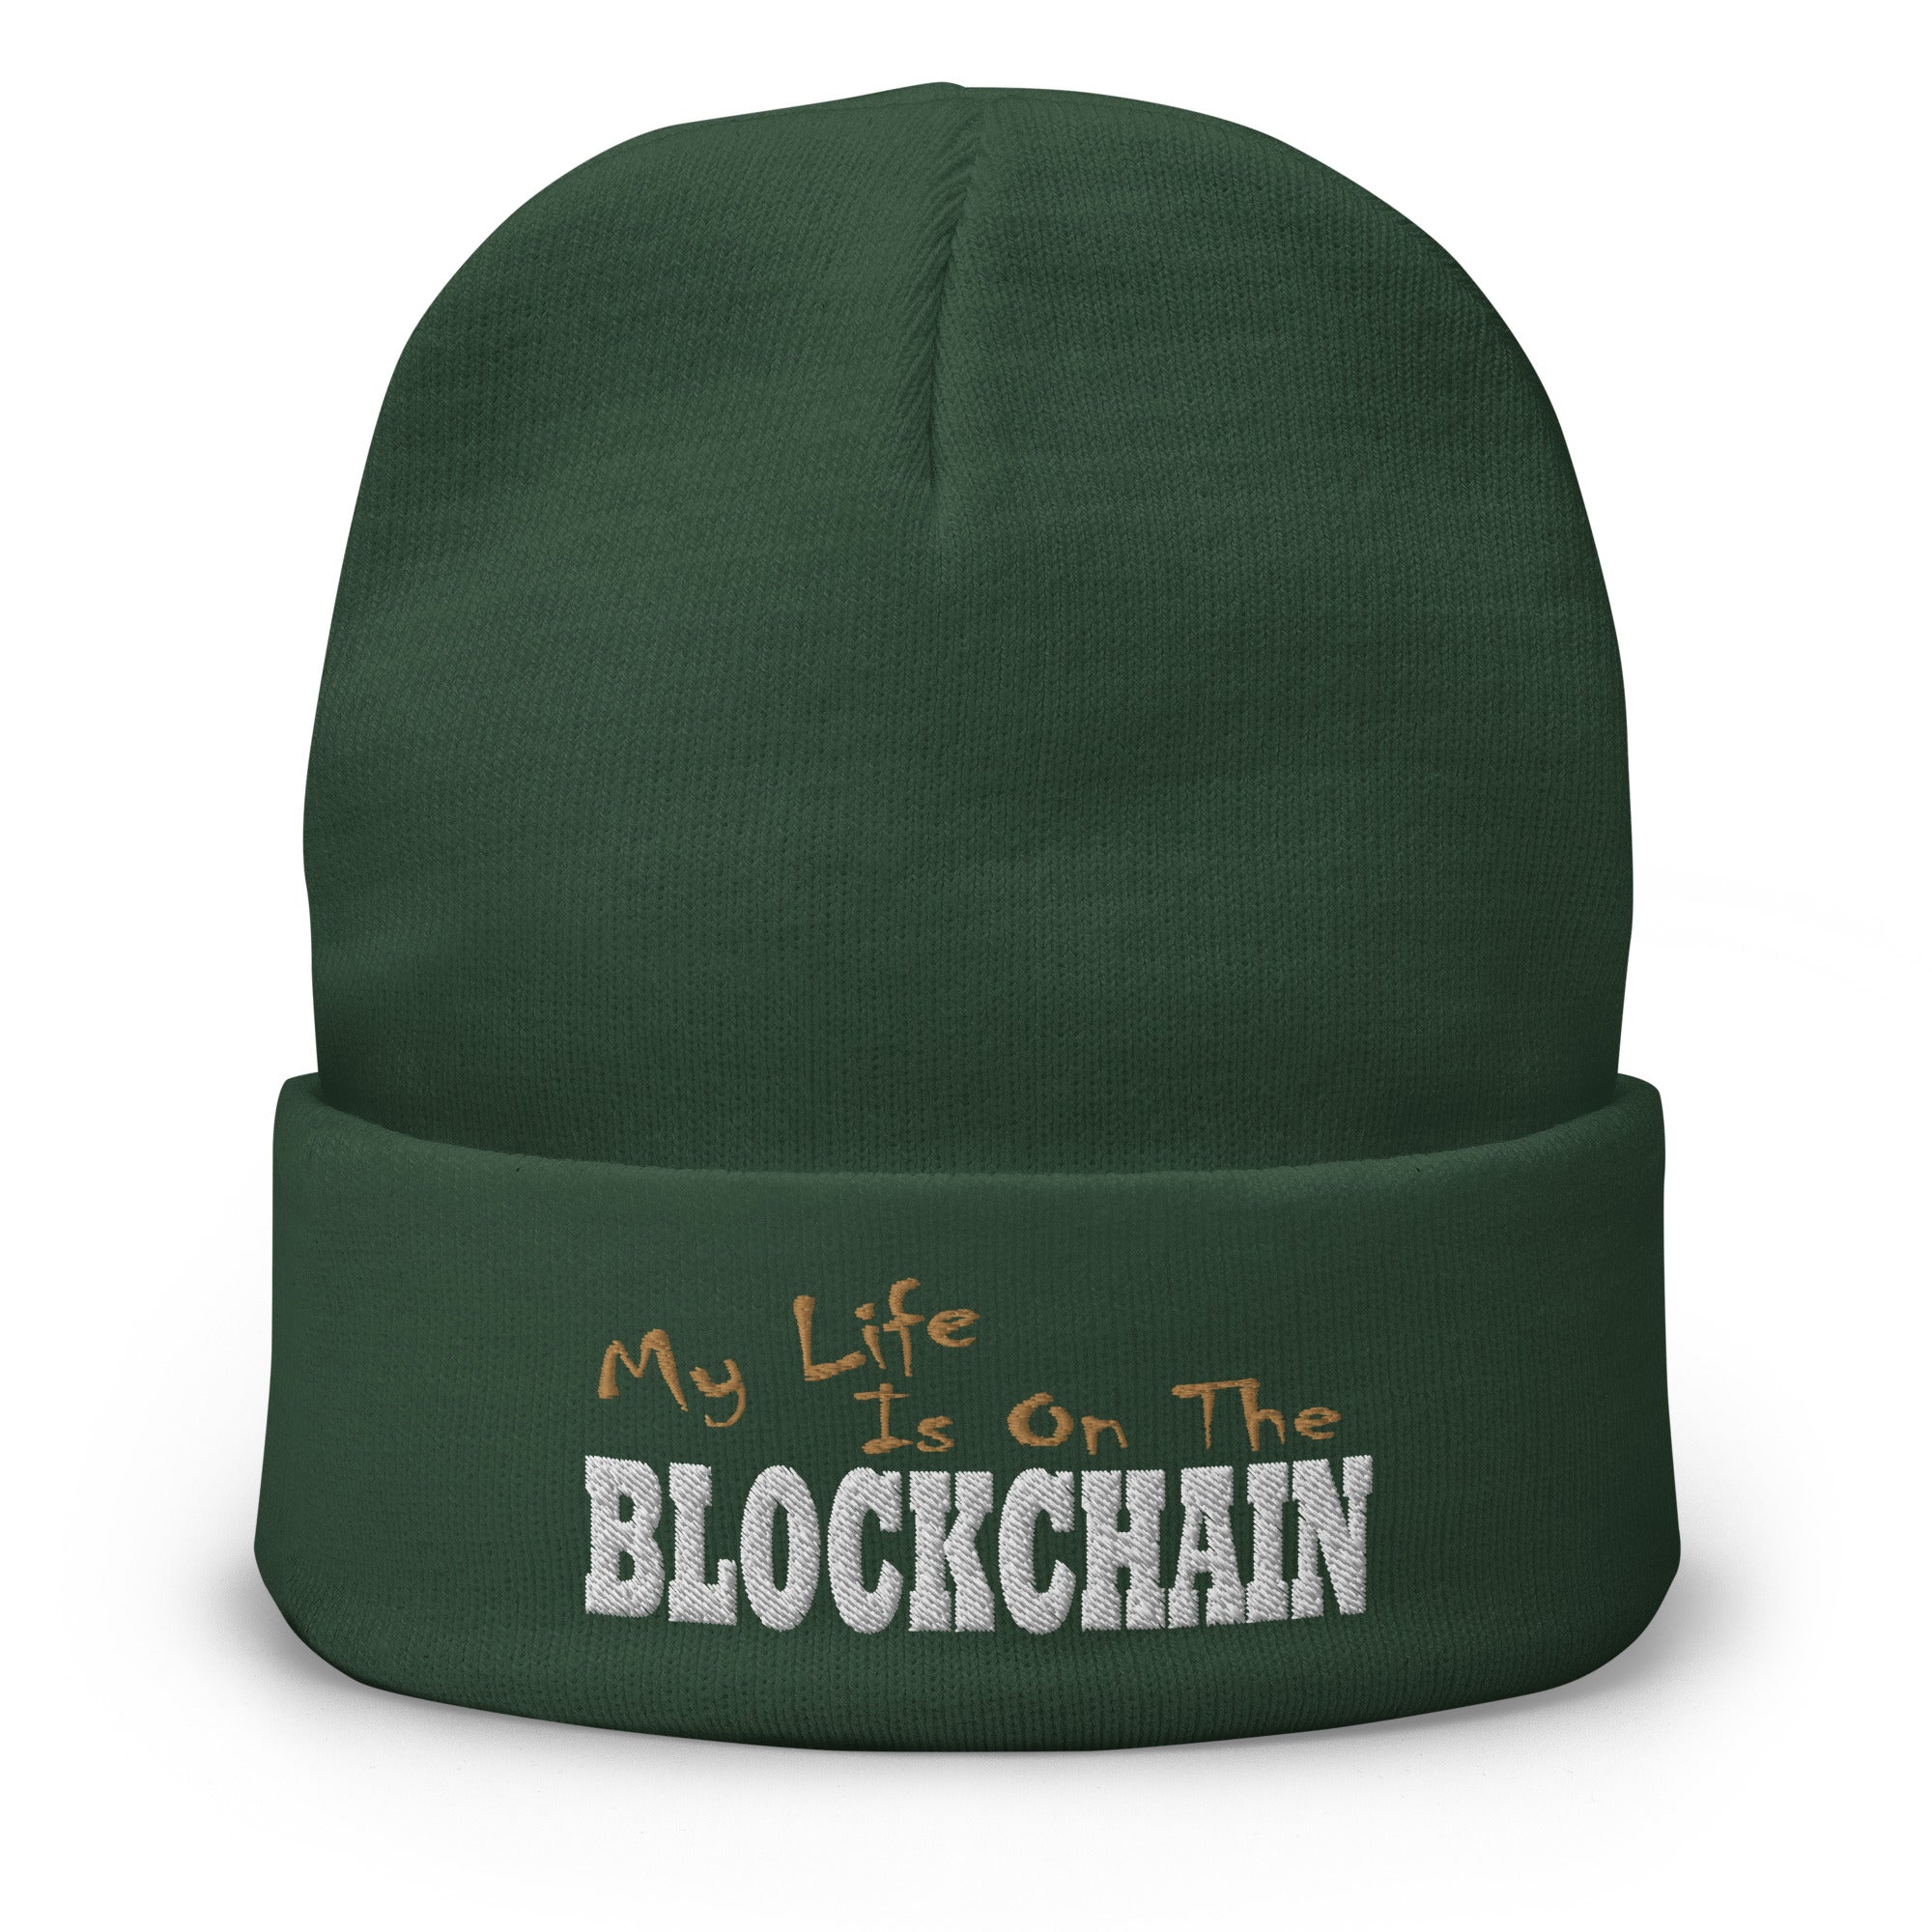 My Life is on the Blockchain Crypto Satire Bitcoin Embroidered Cuff Beanie Cap